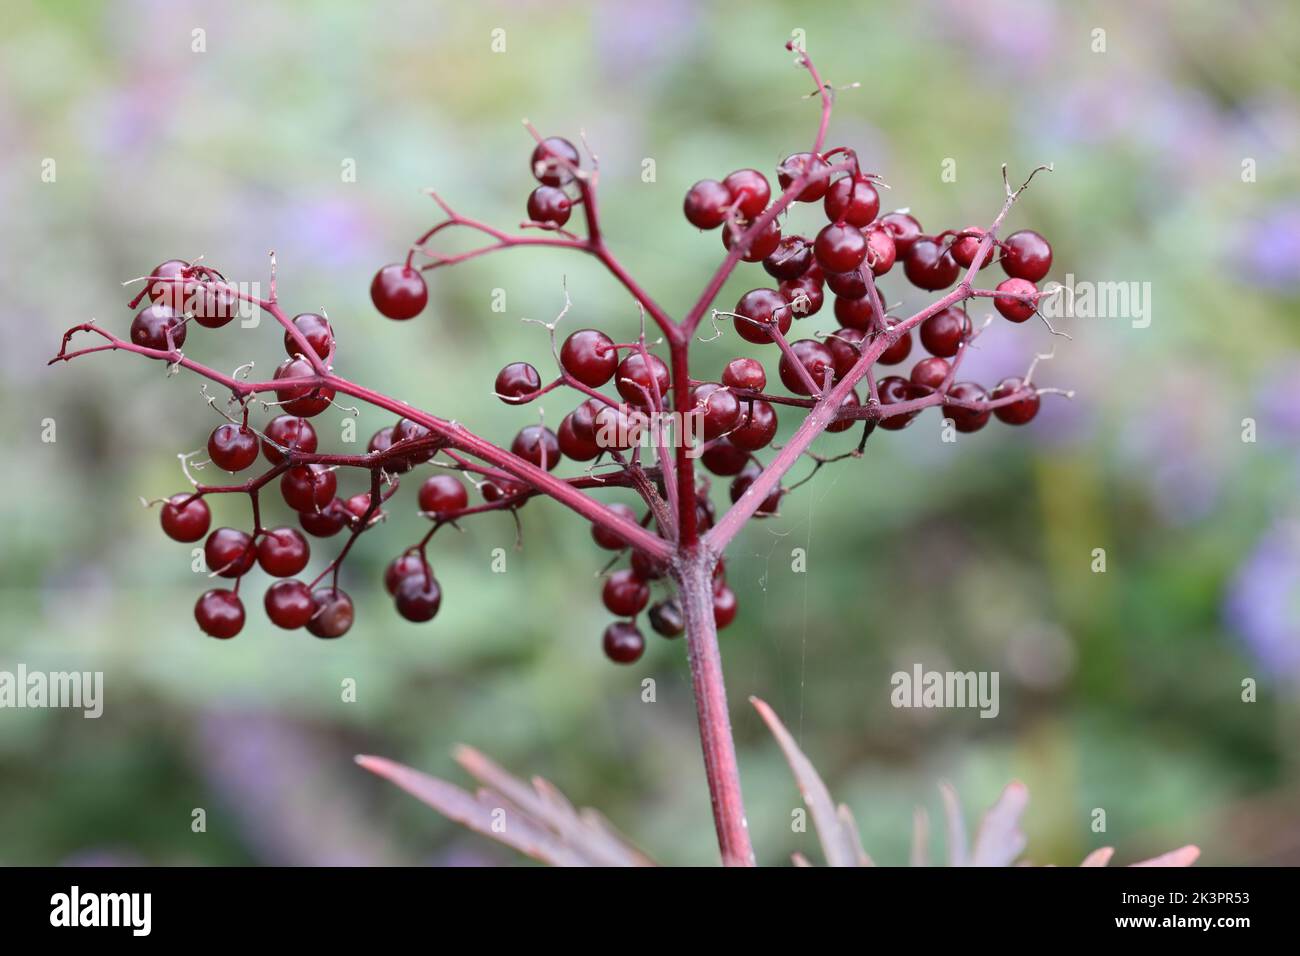 black-red berries adorn an elderberry bush in autumn, close-up with selective focus, blurry background Stock Photo